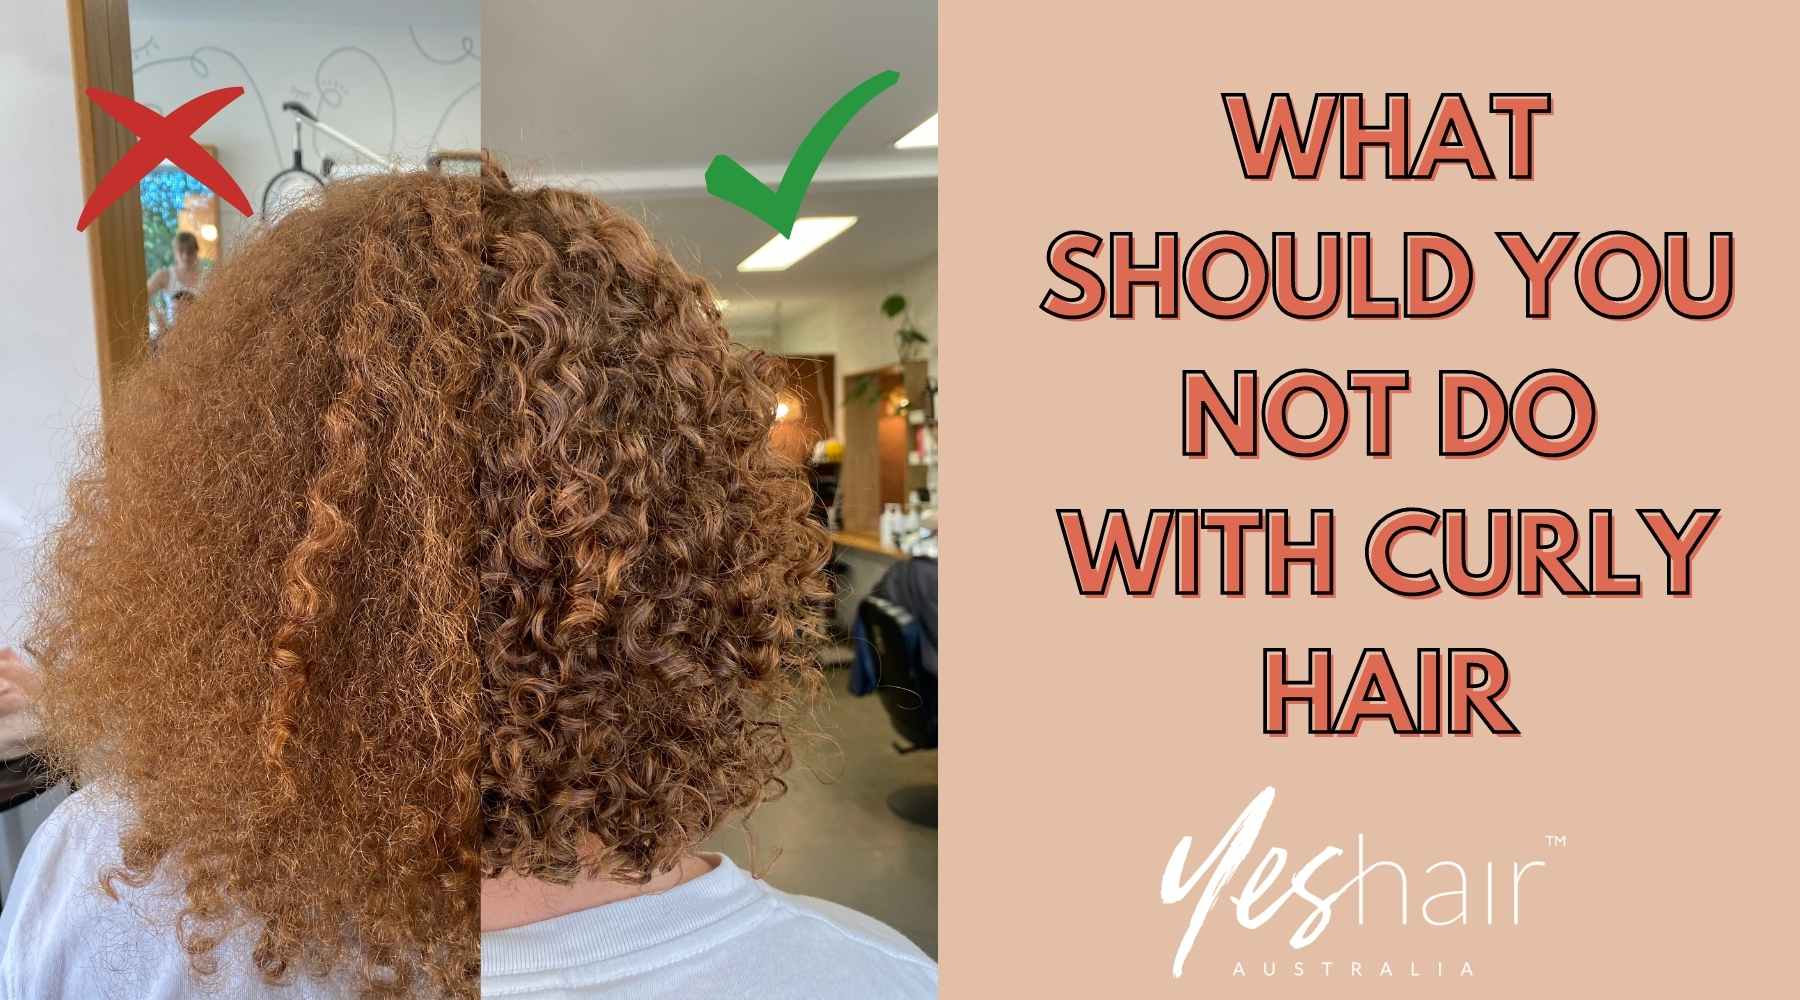 What should you not do with curly hair?